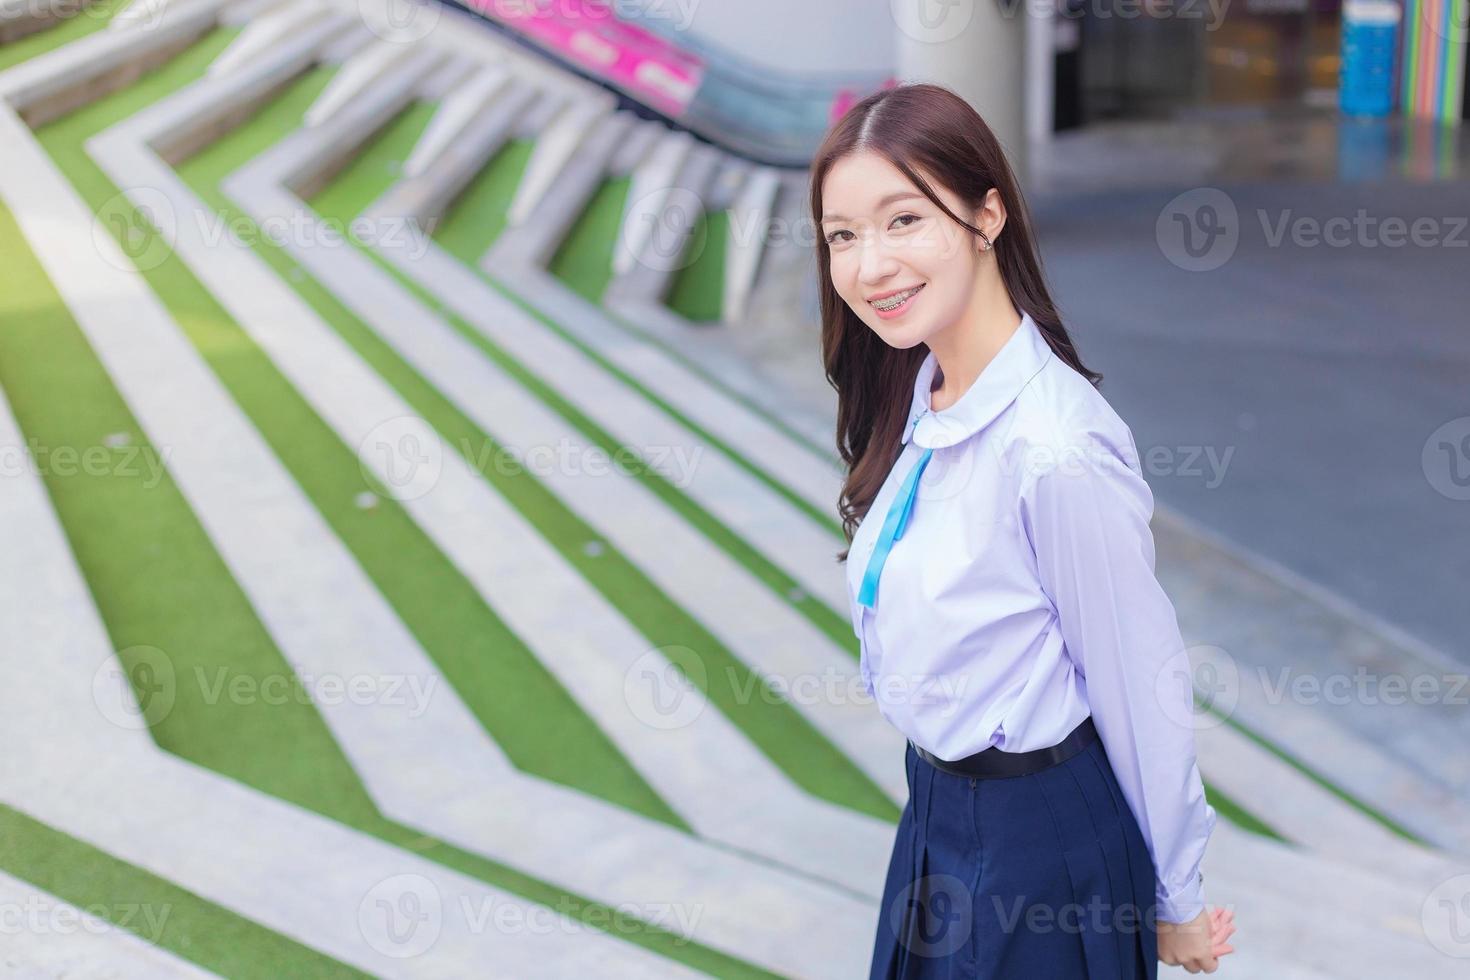 Beautiful high school Asian student girl in the school uniform stands and smiles happily with braces on her teeth while she put her hand on head confidently with the building as a background. photo